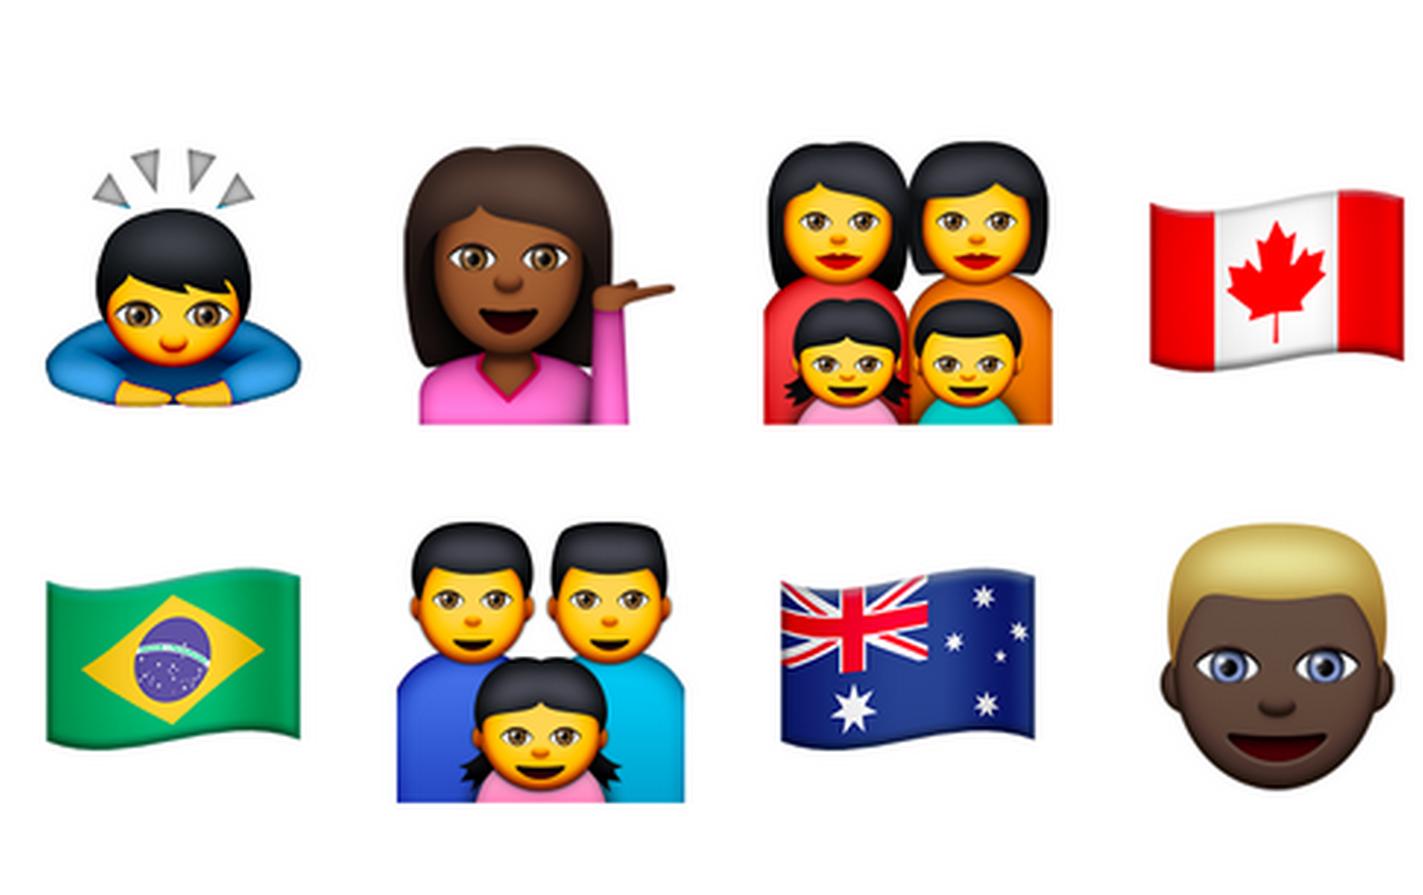 A sample of the updated emojis seen in the beta versions of Apple OS X 10.10.3 and iOS 8.3 released to developers.